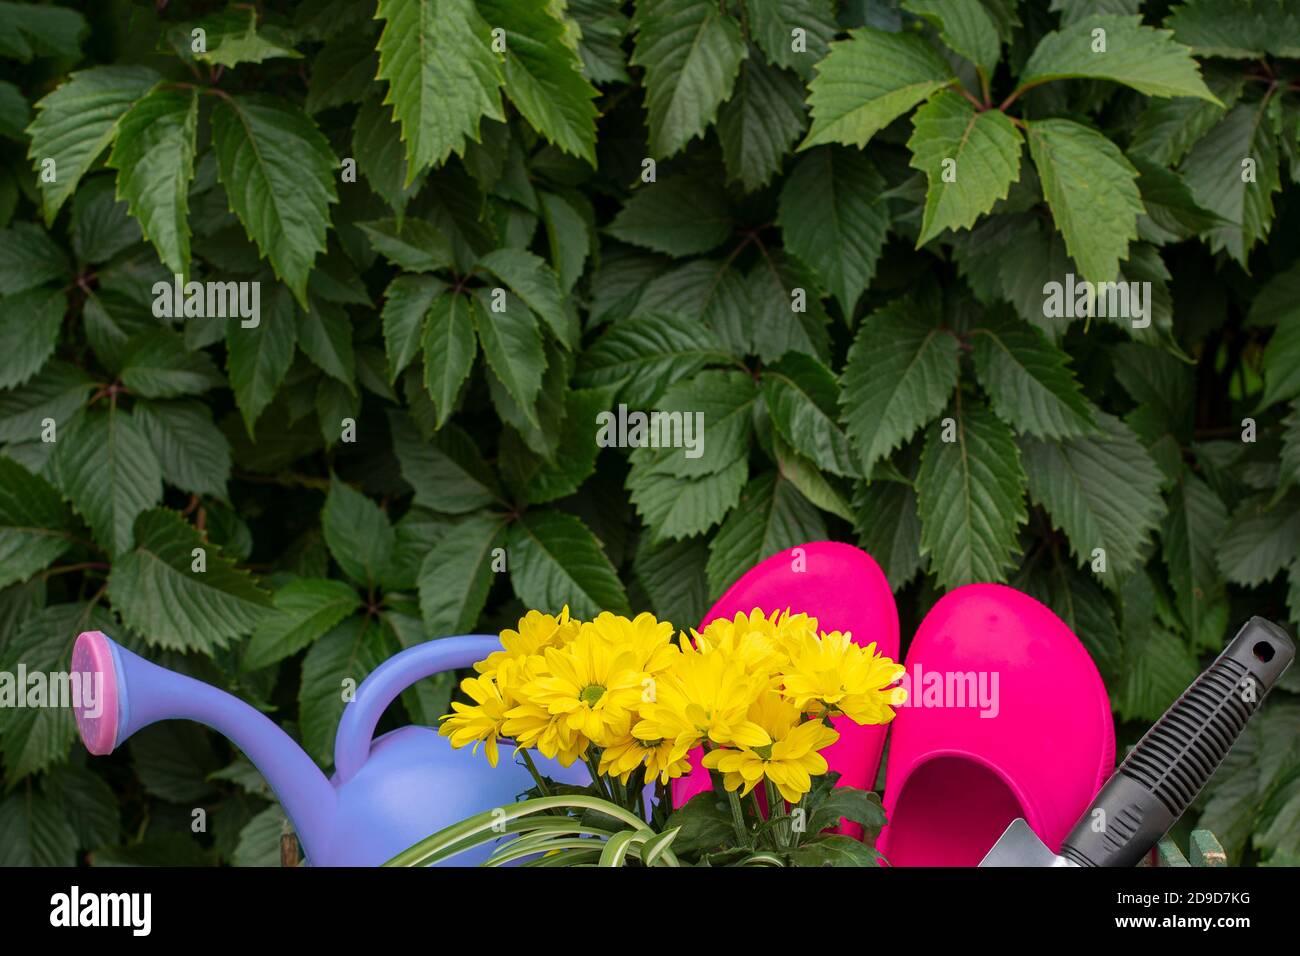 Gardening. work in the garden. tools, watering can and flower in a pot on a background of green leaves. Copy space. Wild grapes. climbing plants vine Stock Photo